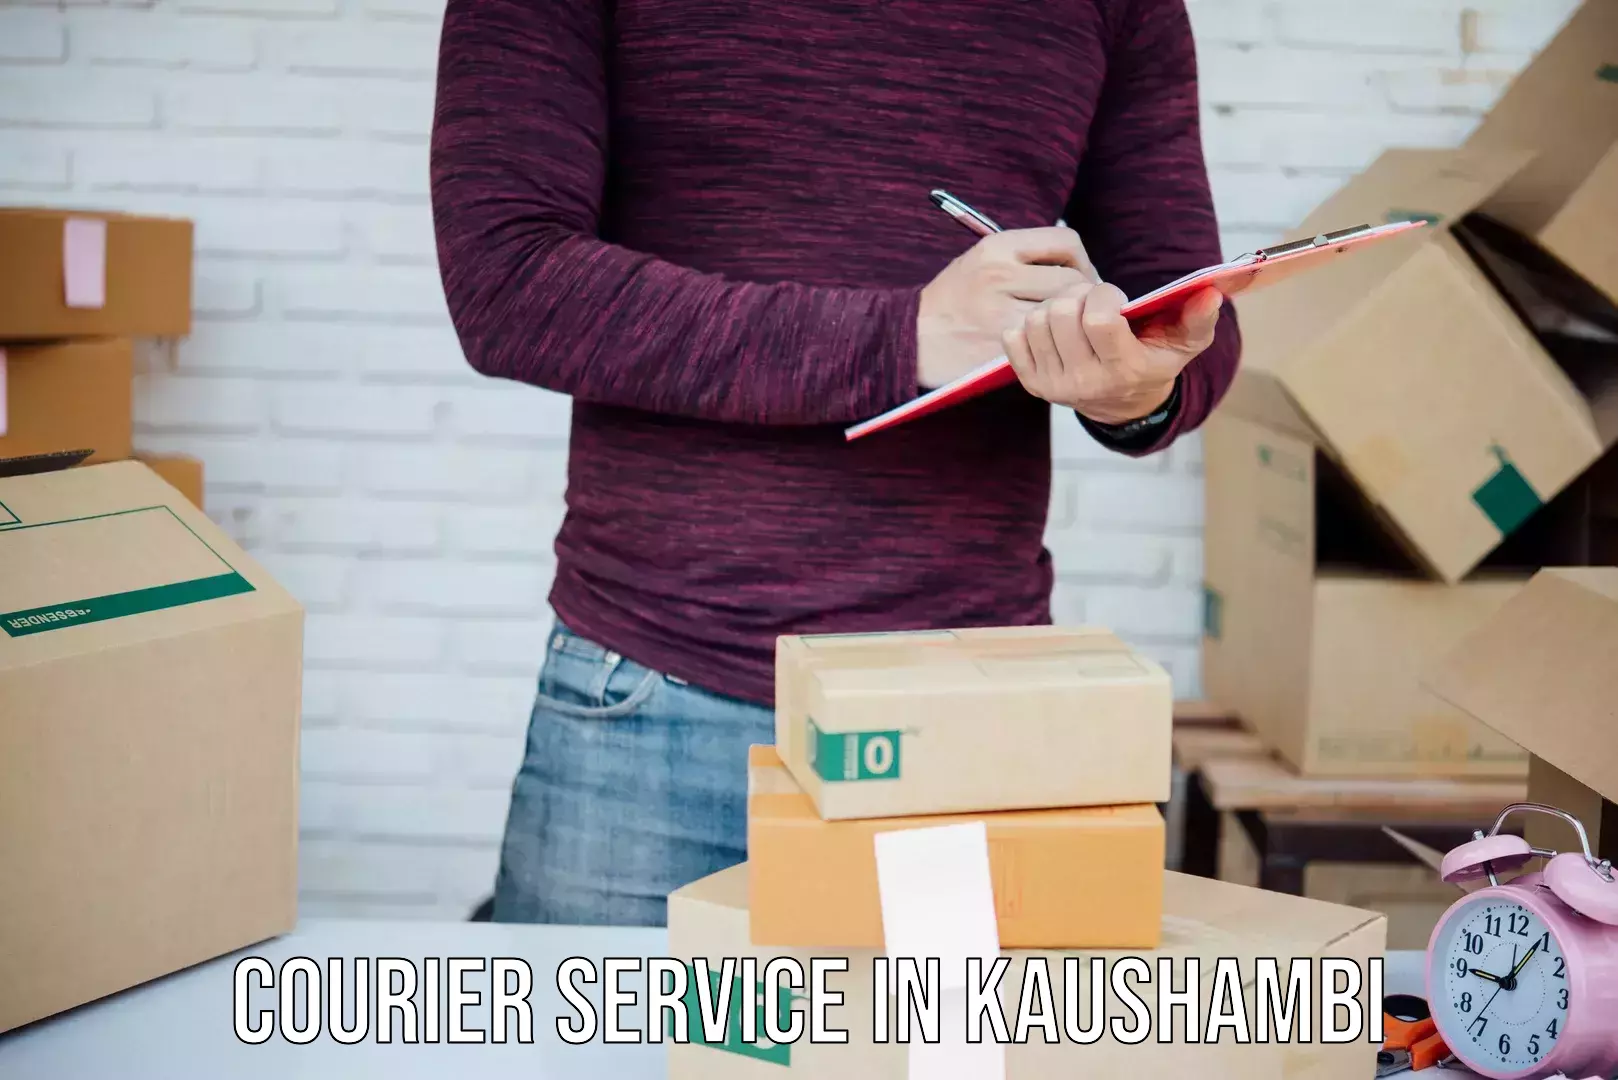 Affordable parcel rates in Kaushambi